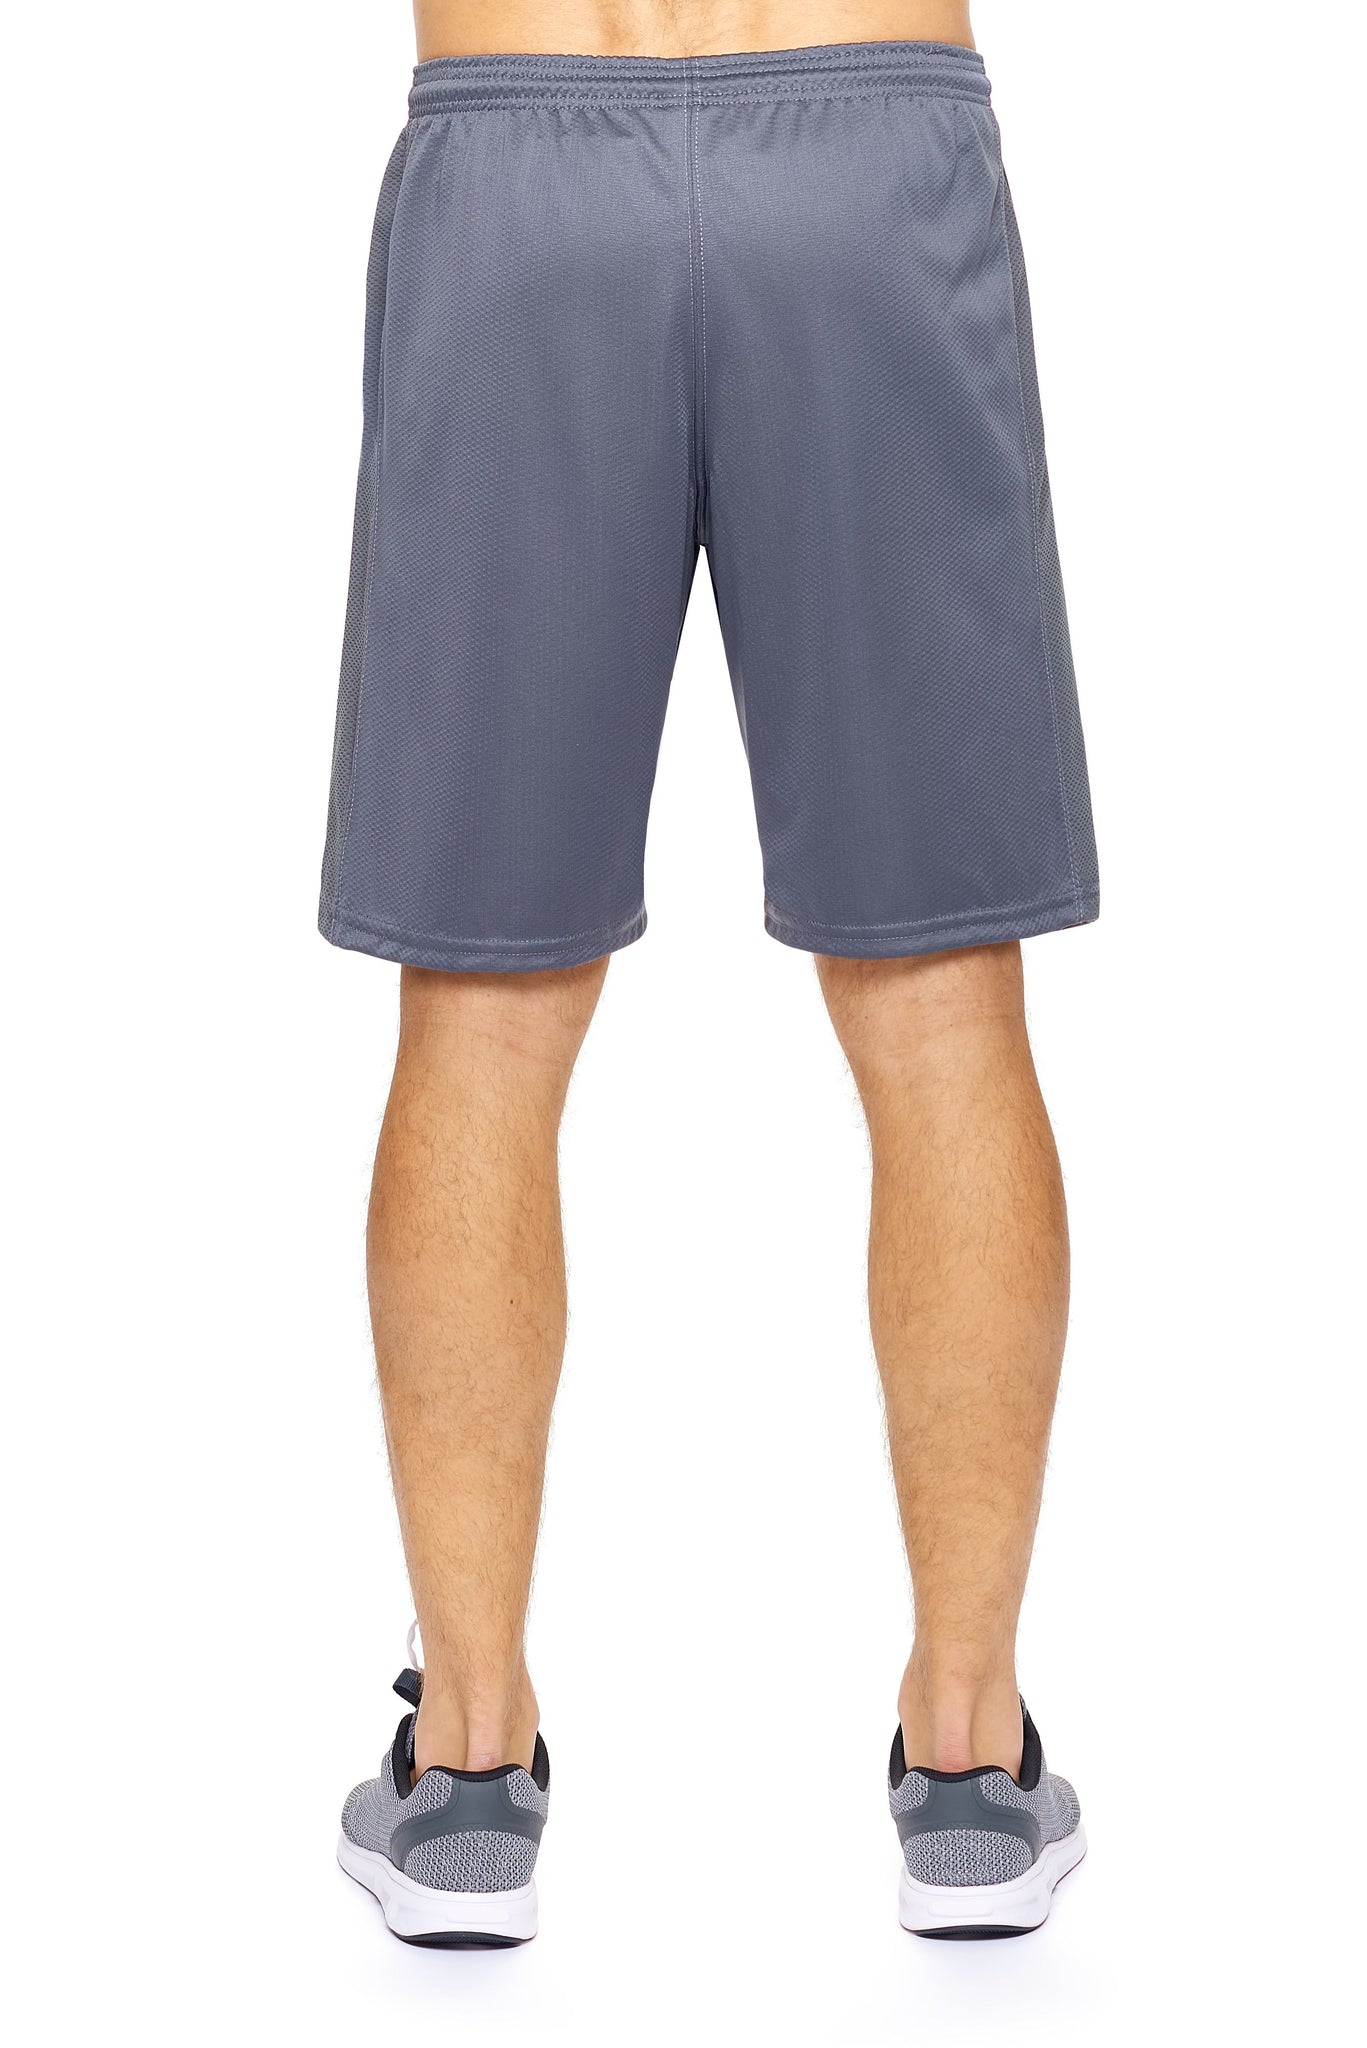 Expert Brand Wholesale Men's Lifestyle Shorts in Charcoal Image 3#charcoal